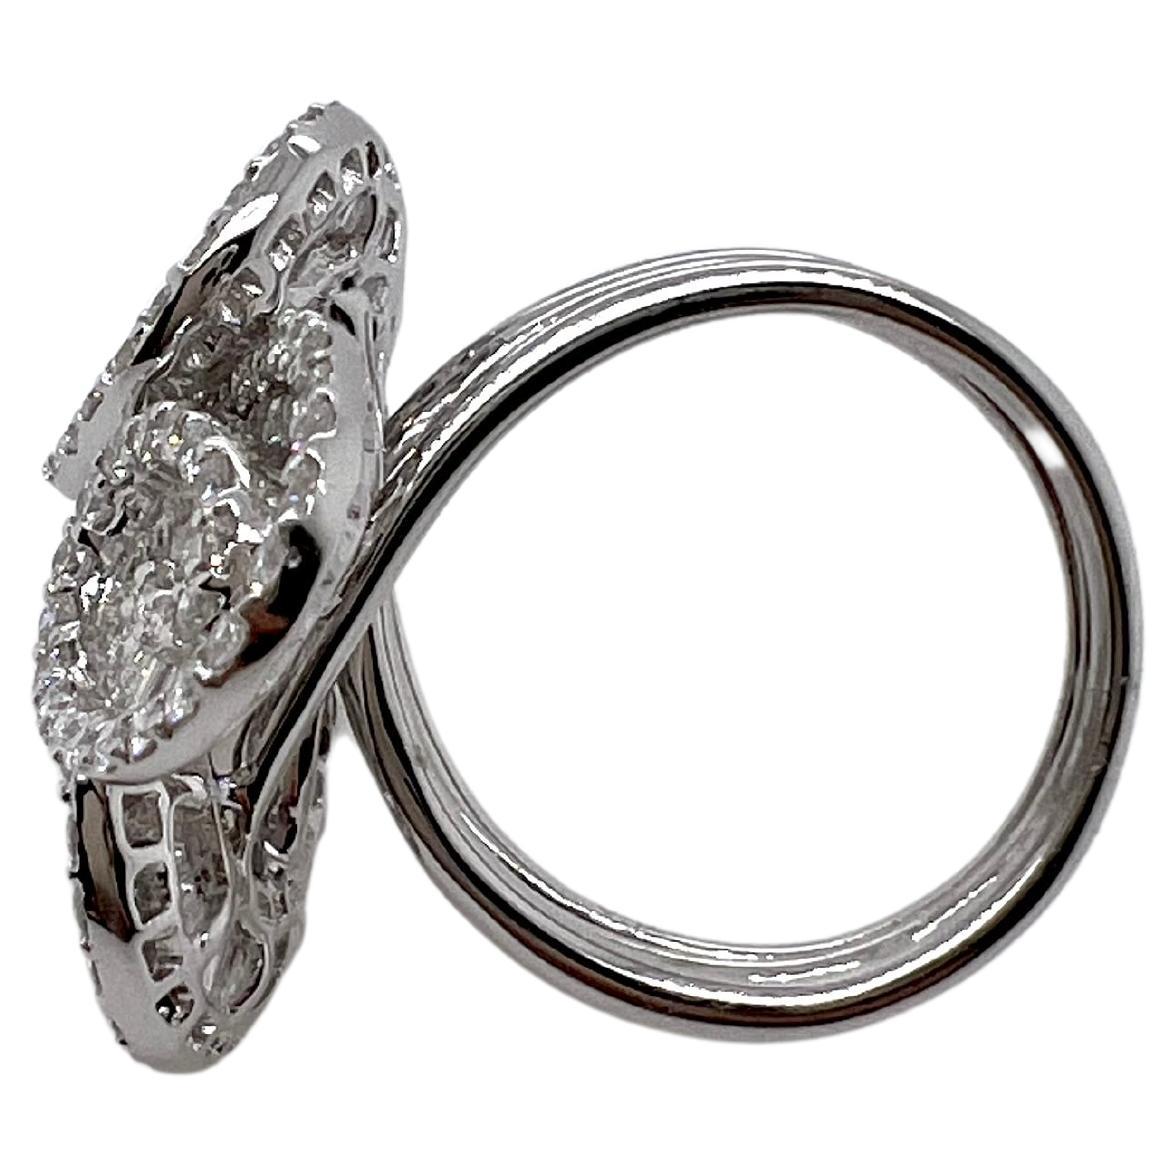 This beautiful diamond ring is set in 18k white gold and has a unique artistic appearance.  The 4 spiral diamond pieces are uniquely arranged to give a breathtaking, dramatic look that will grasp everyone's attention. 



Size: 6.75 (can be